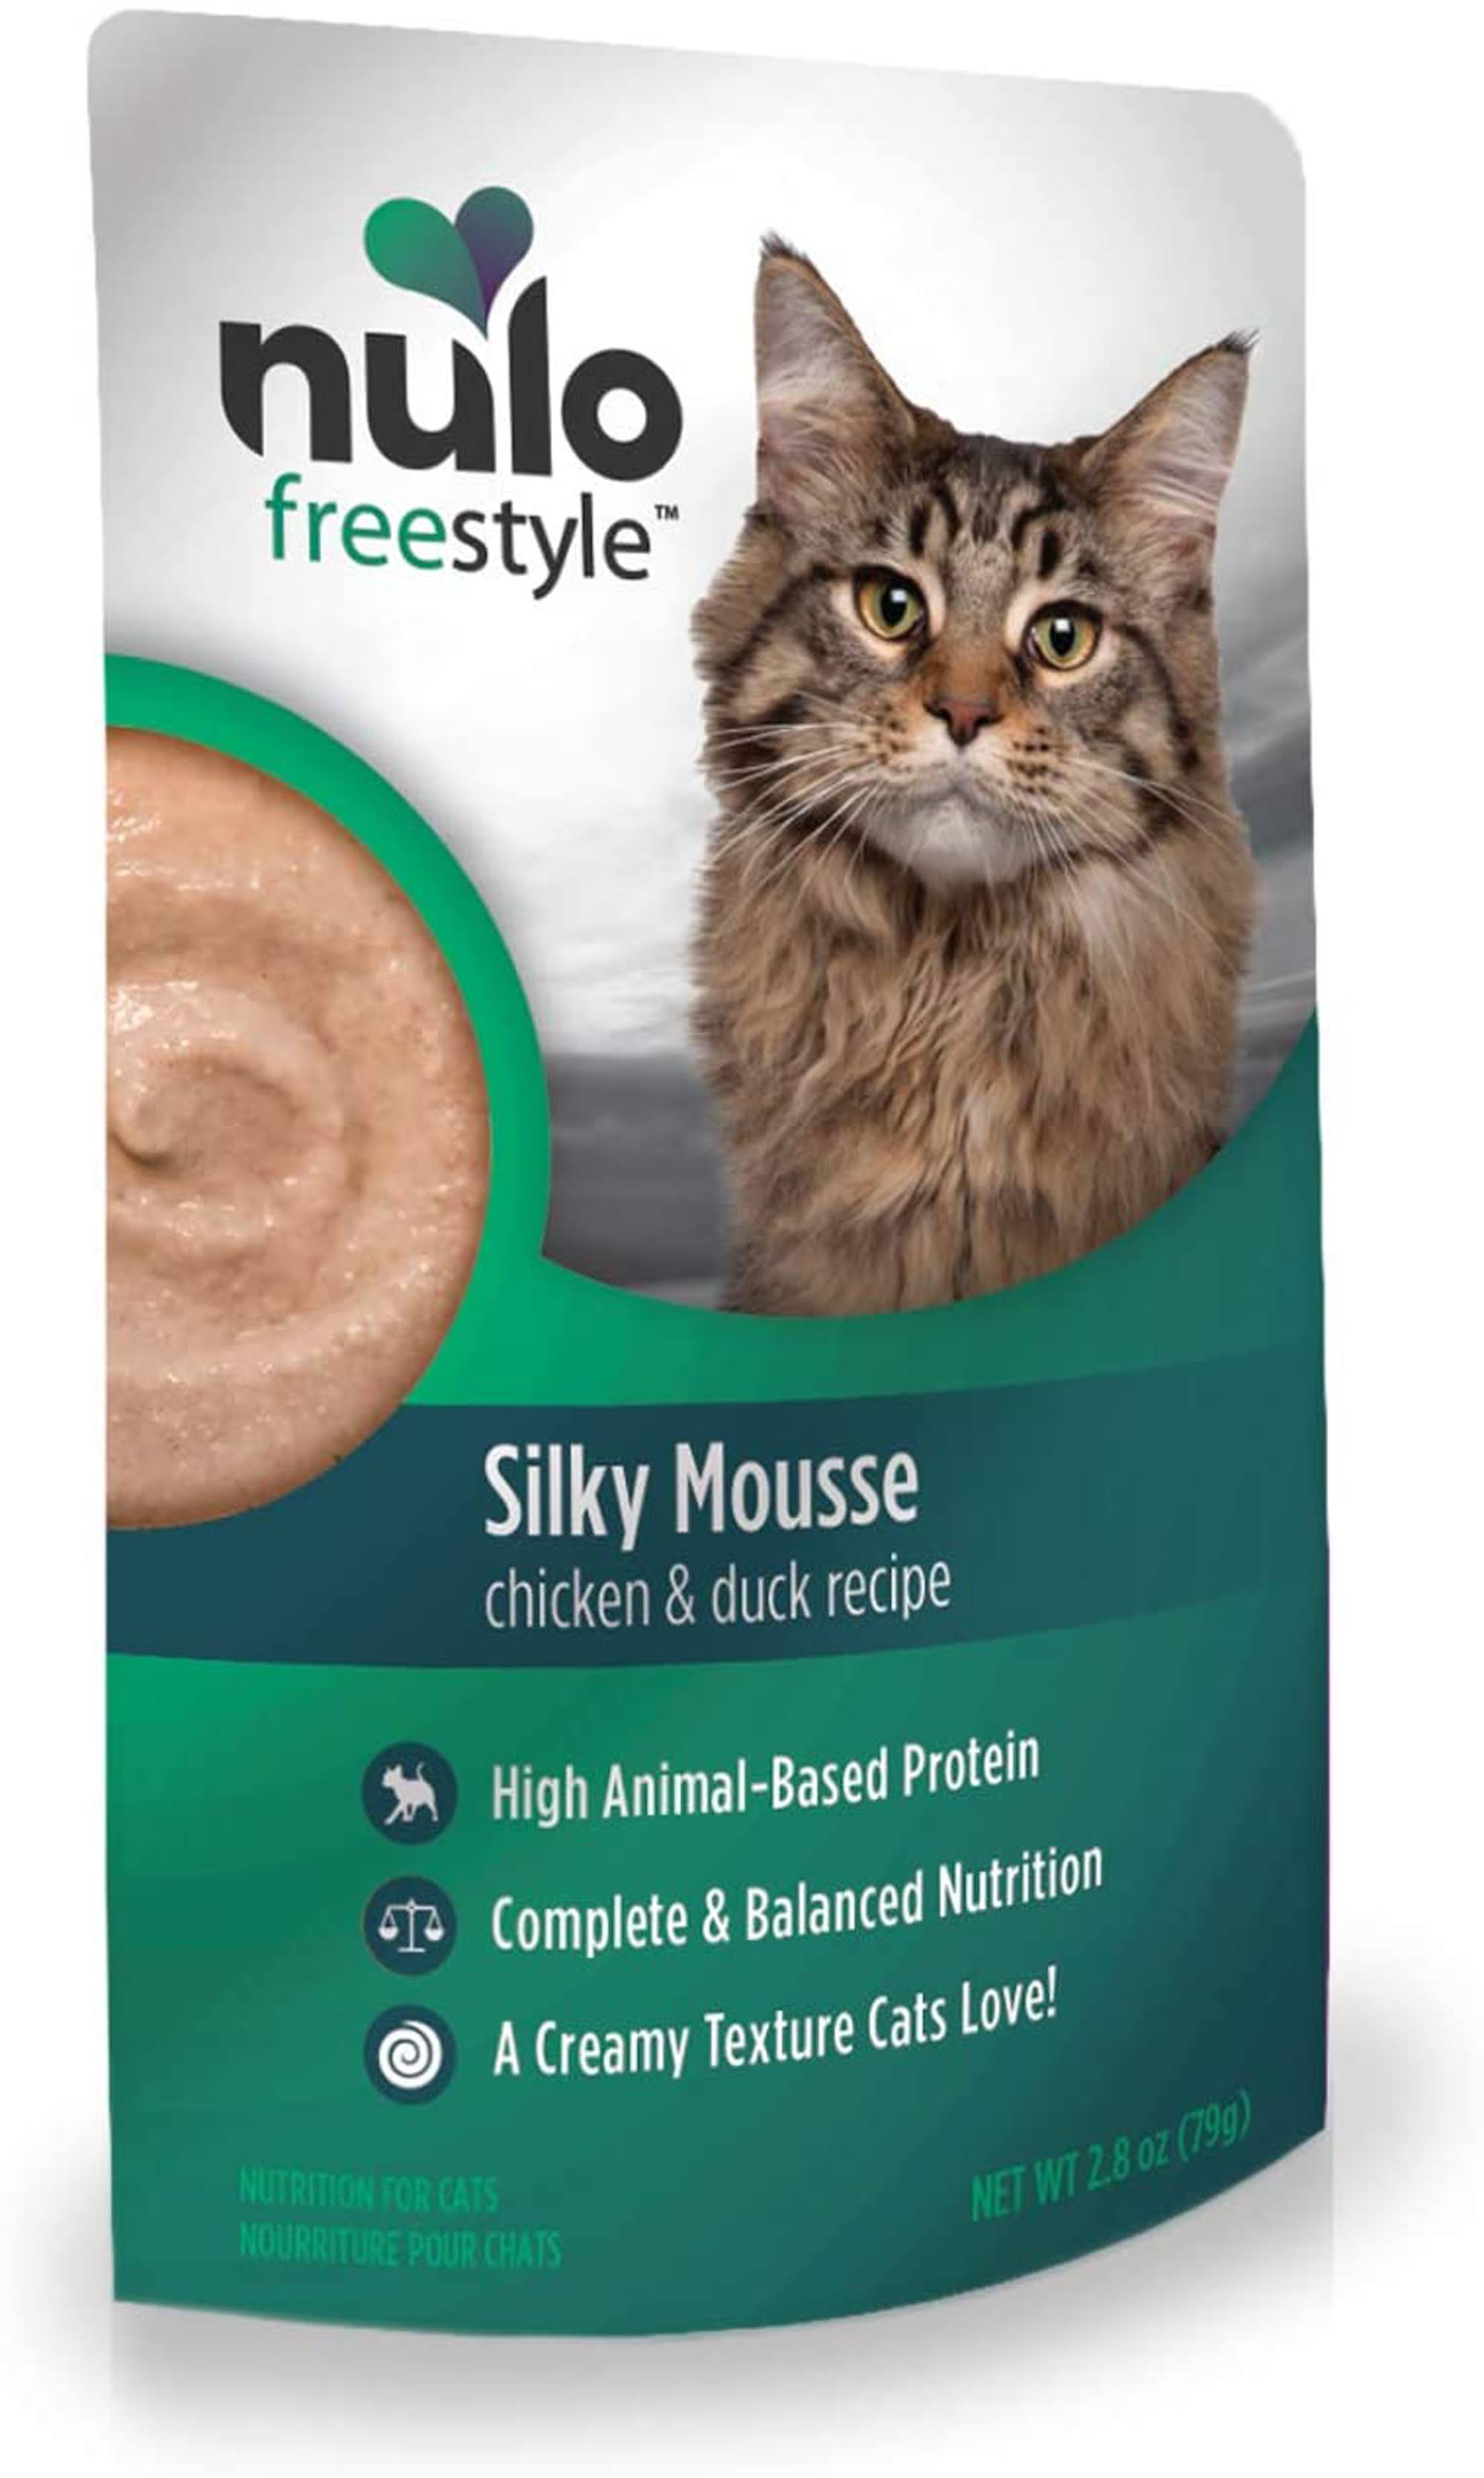 Nulo Freestyle Silky Mousse Chicken & Duck Cat Food Pouch / 2.8 oz